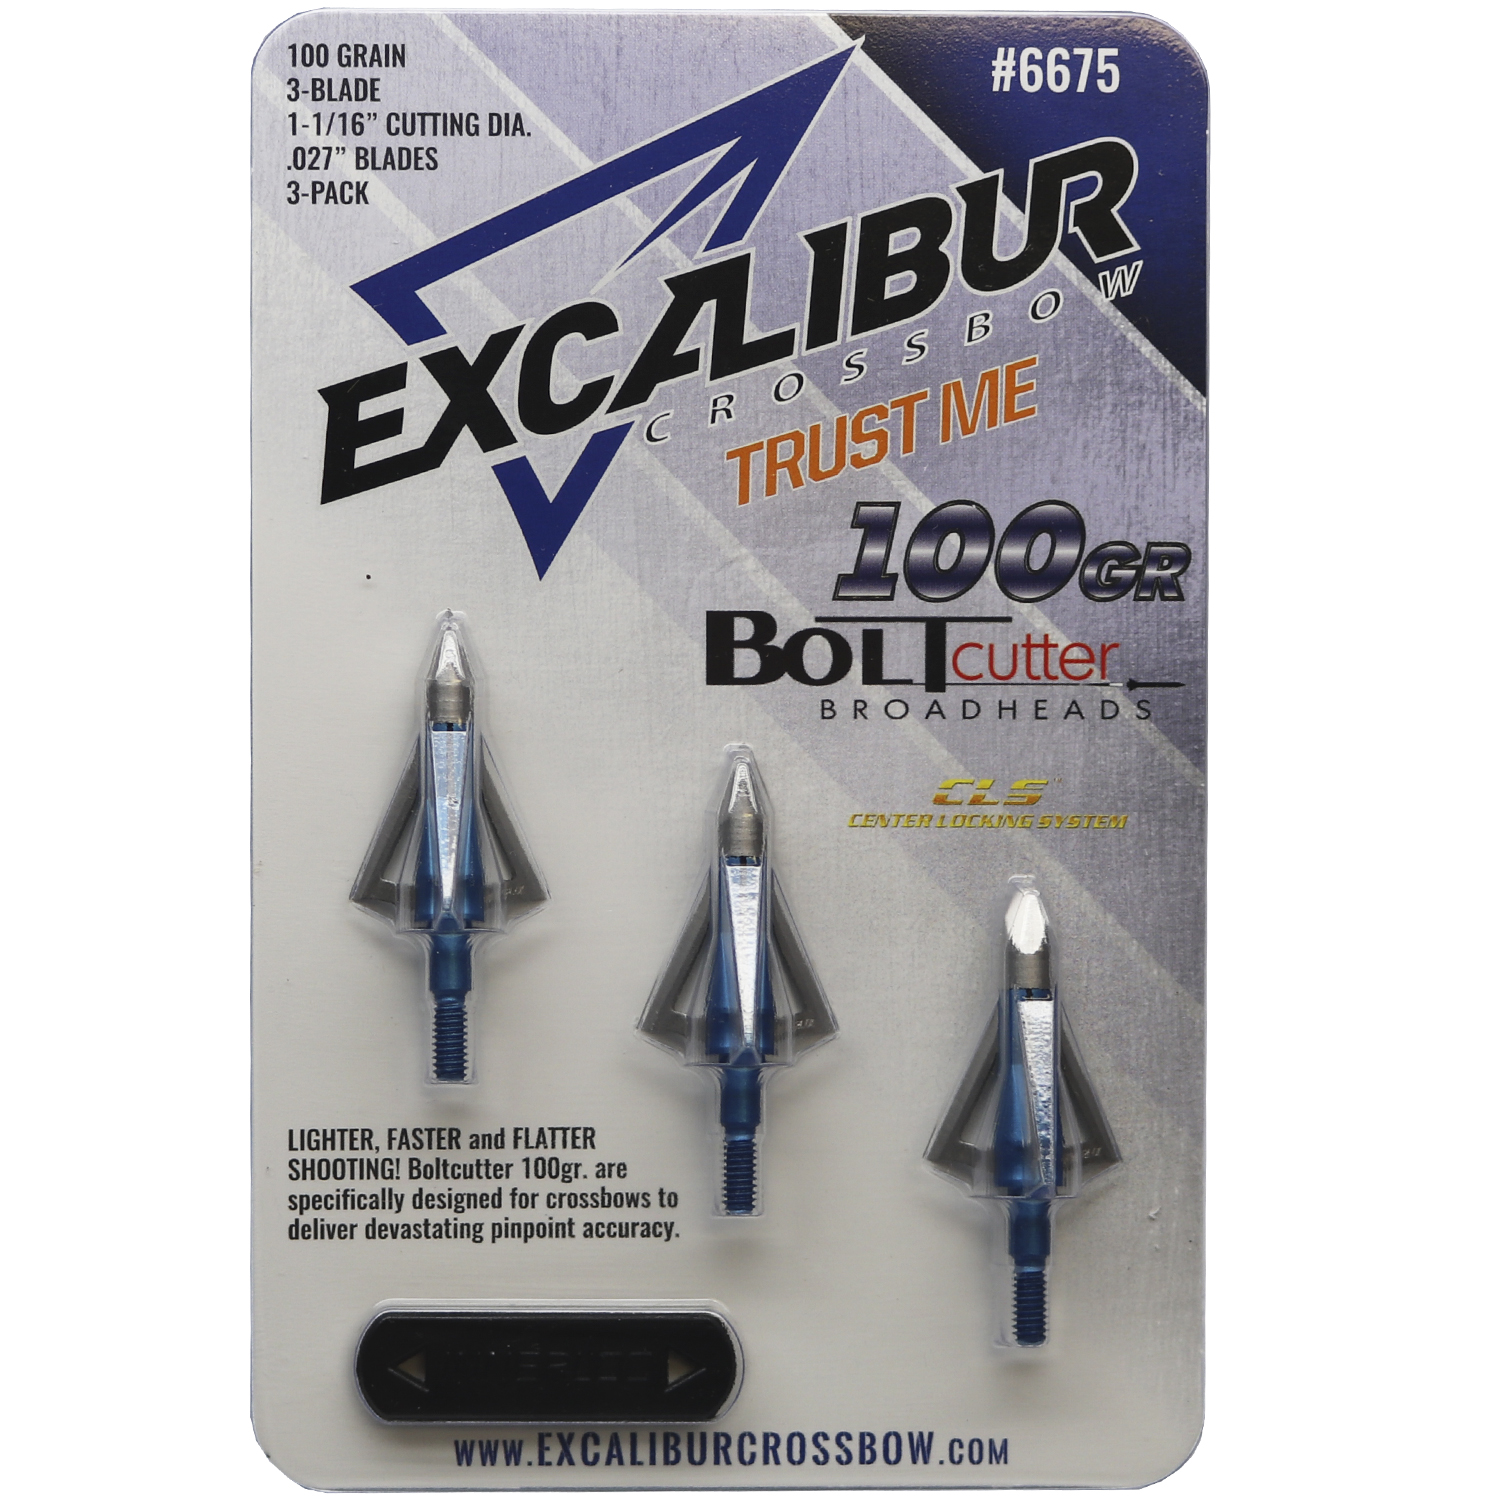 Excalibur Crossbow/Xbow Cisaille Broadhead 100 g Bolt Cutter-objet 6675 